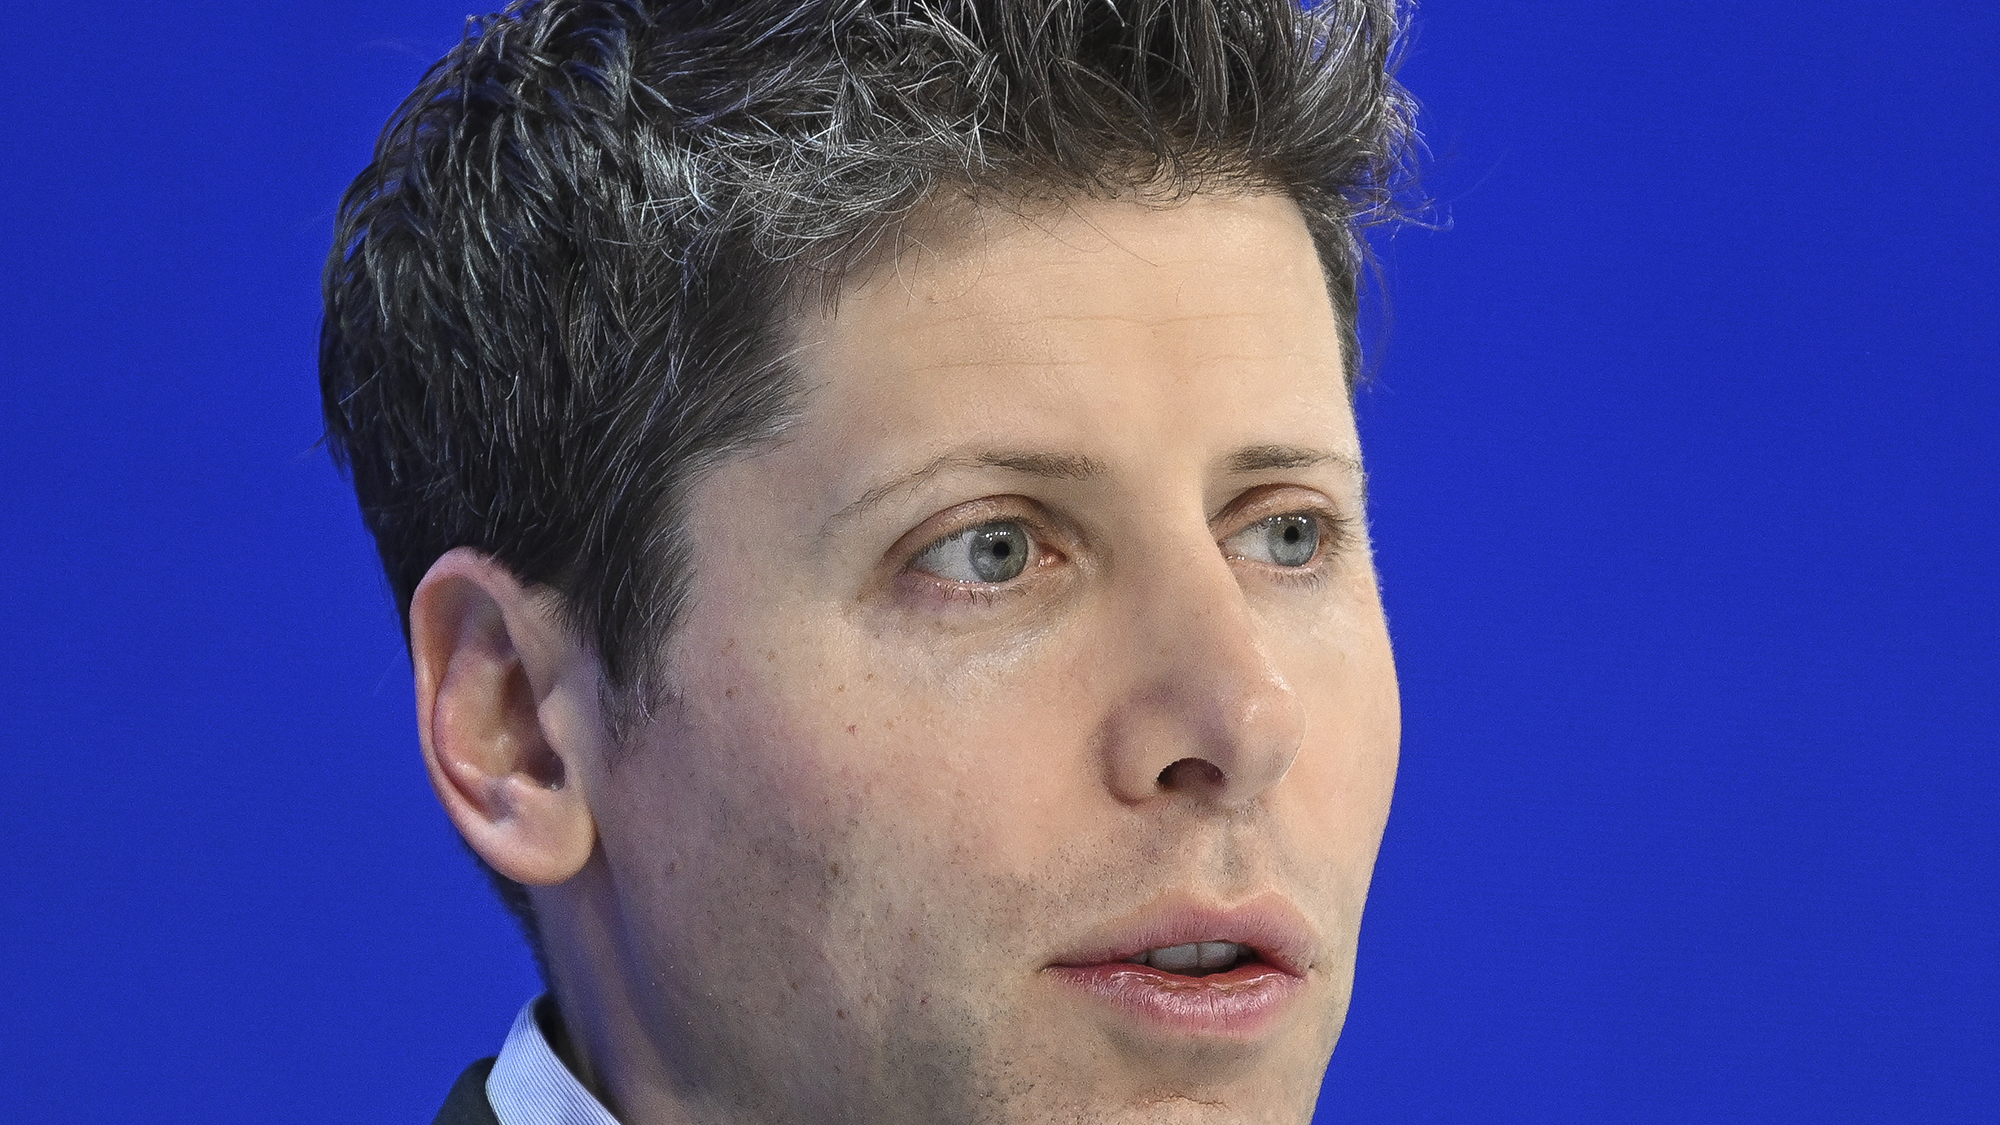  Sam Altman, chief executive officer of OpenAI, attends the World Economic Forum (WEF) in Davos, Switzerland.